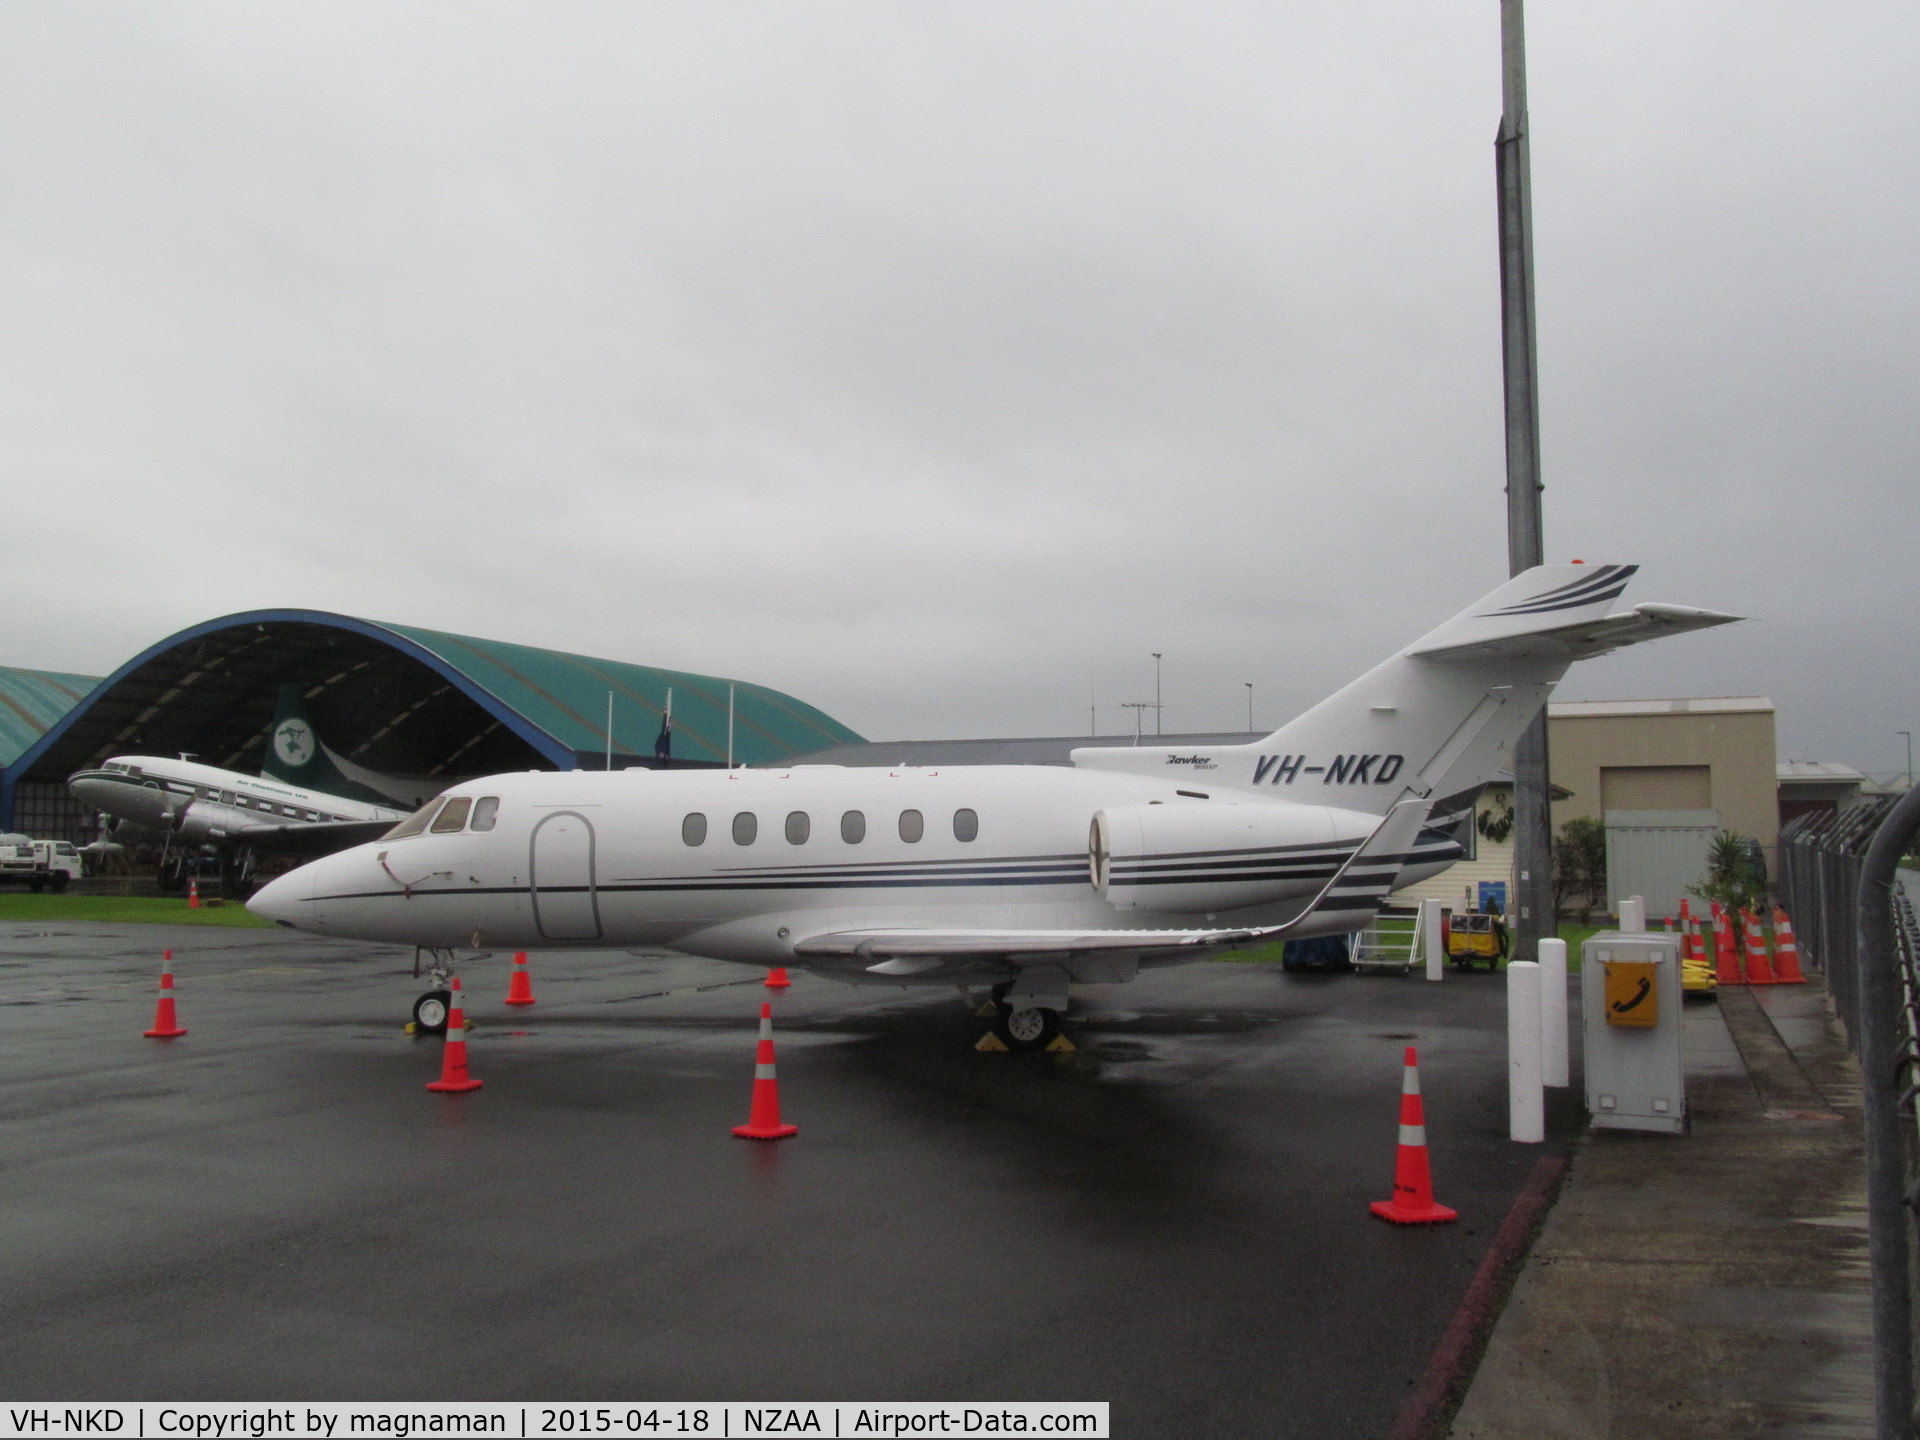 VH-NKD, 2008 Hawker Beechcraft 900XP C/N HA-0064, Recent regular to NZAA but today first time I had chance to get a photo. My first VH- HS125